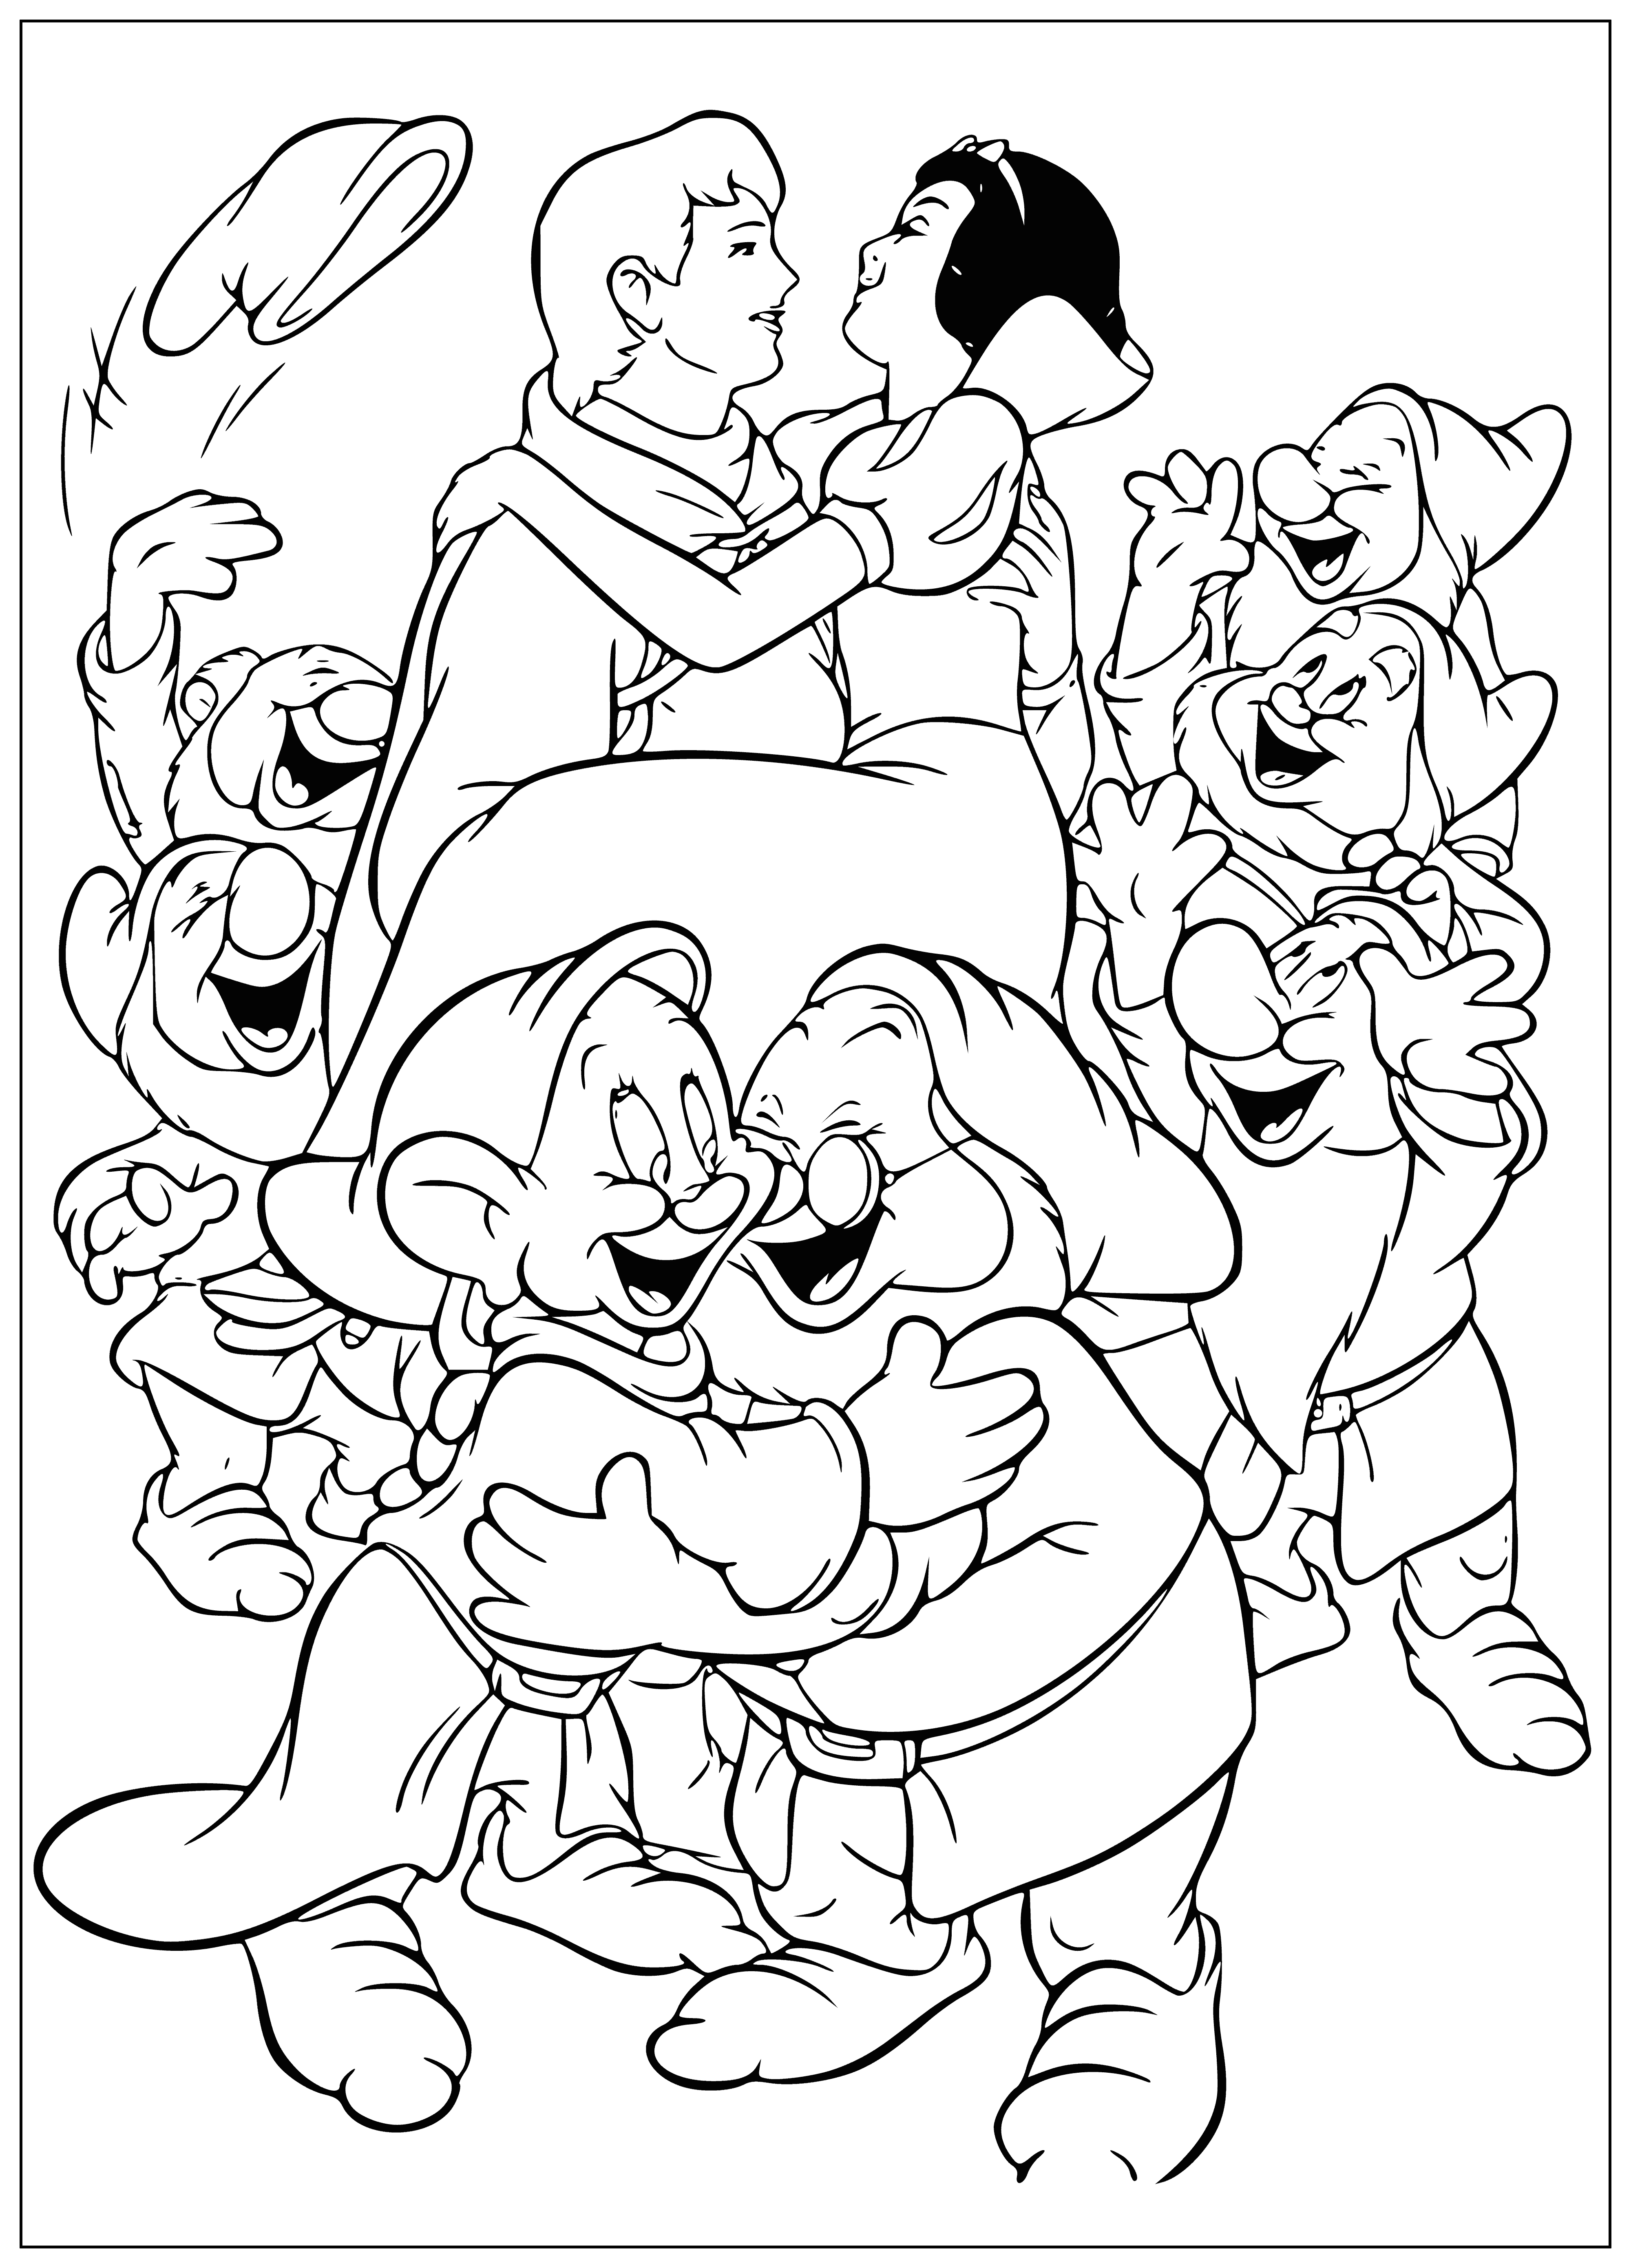 coloring page: Snow White and Prince getting married with Dwarfs as witnesses. She wears white gown, veil. Everyone ready to tie the knot!